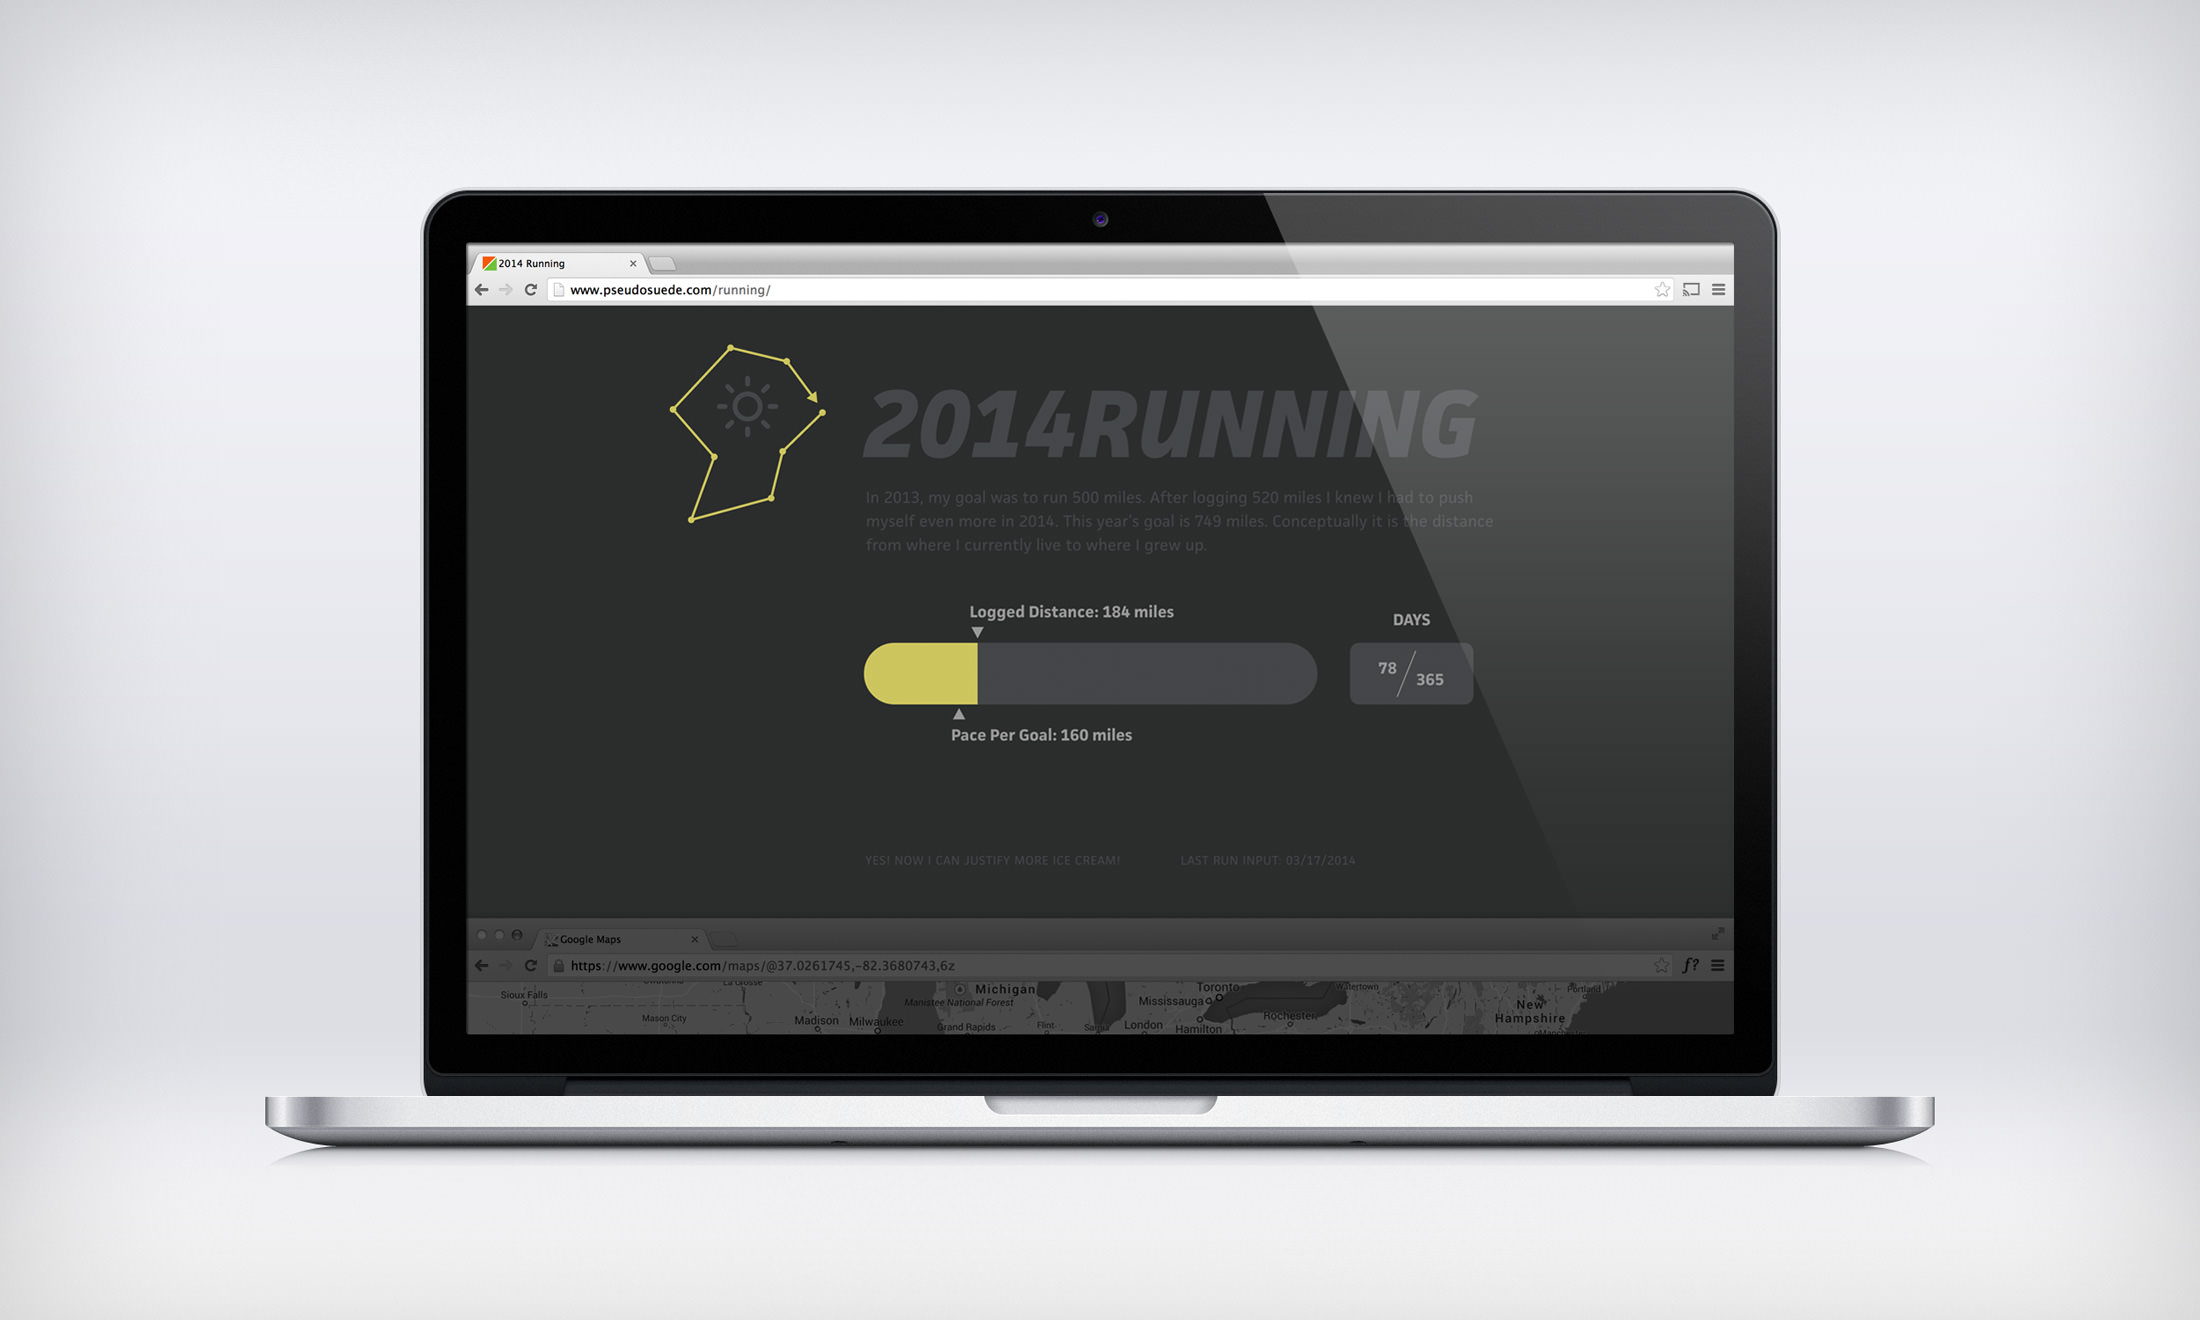 The 2014 Running website as viewed on a laptop.